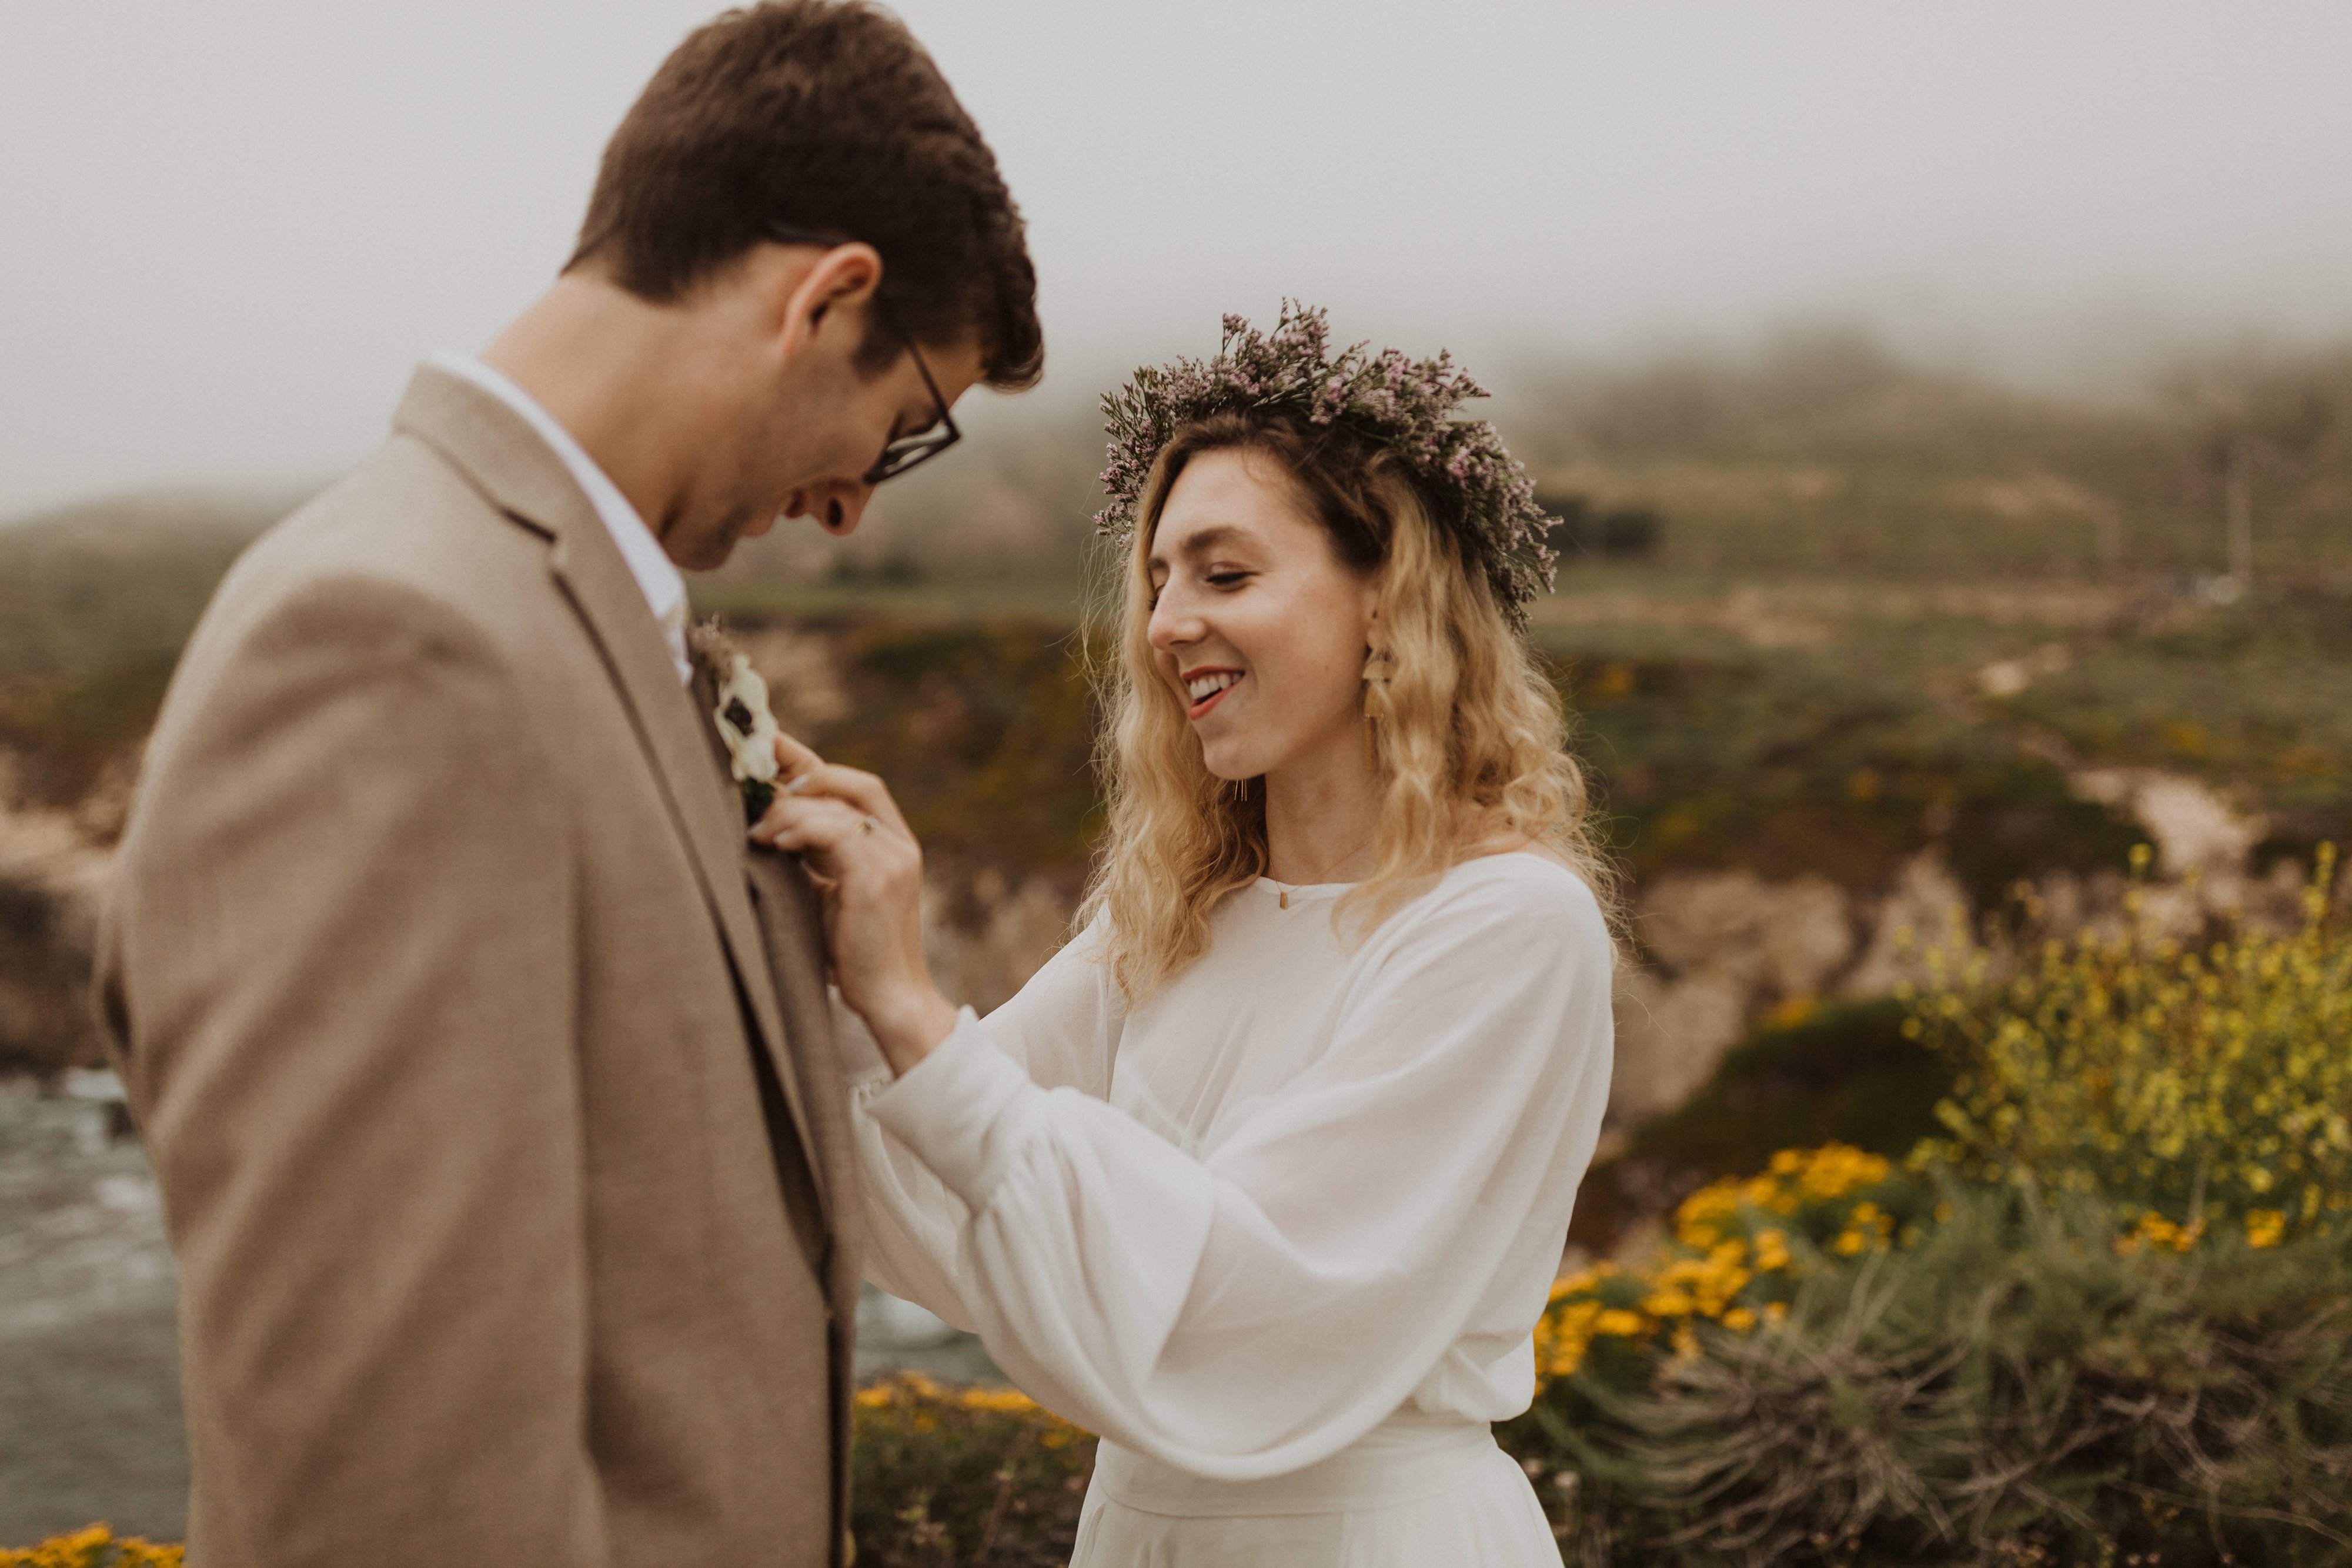 boho bride and groom getting ready to elope in California.